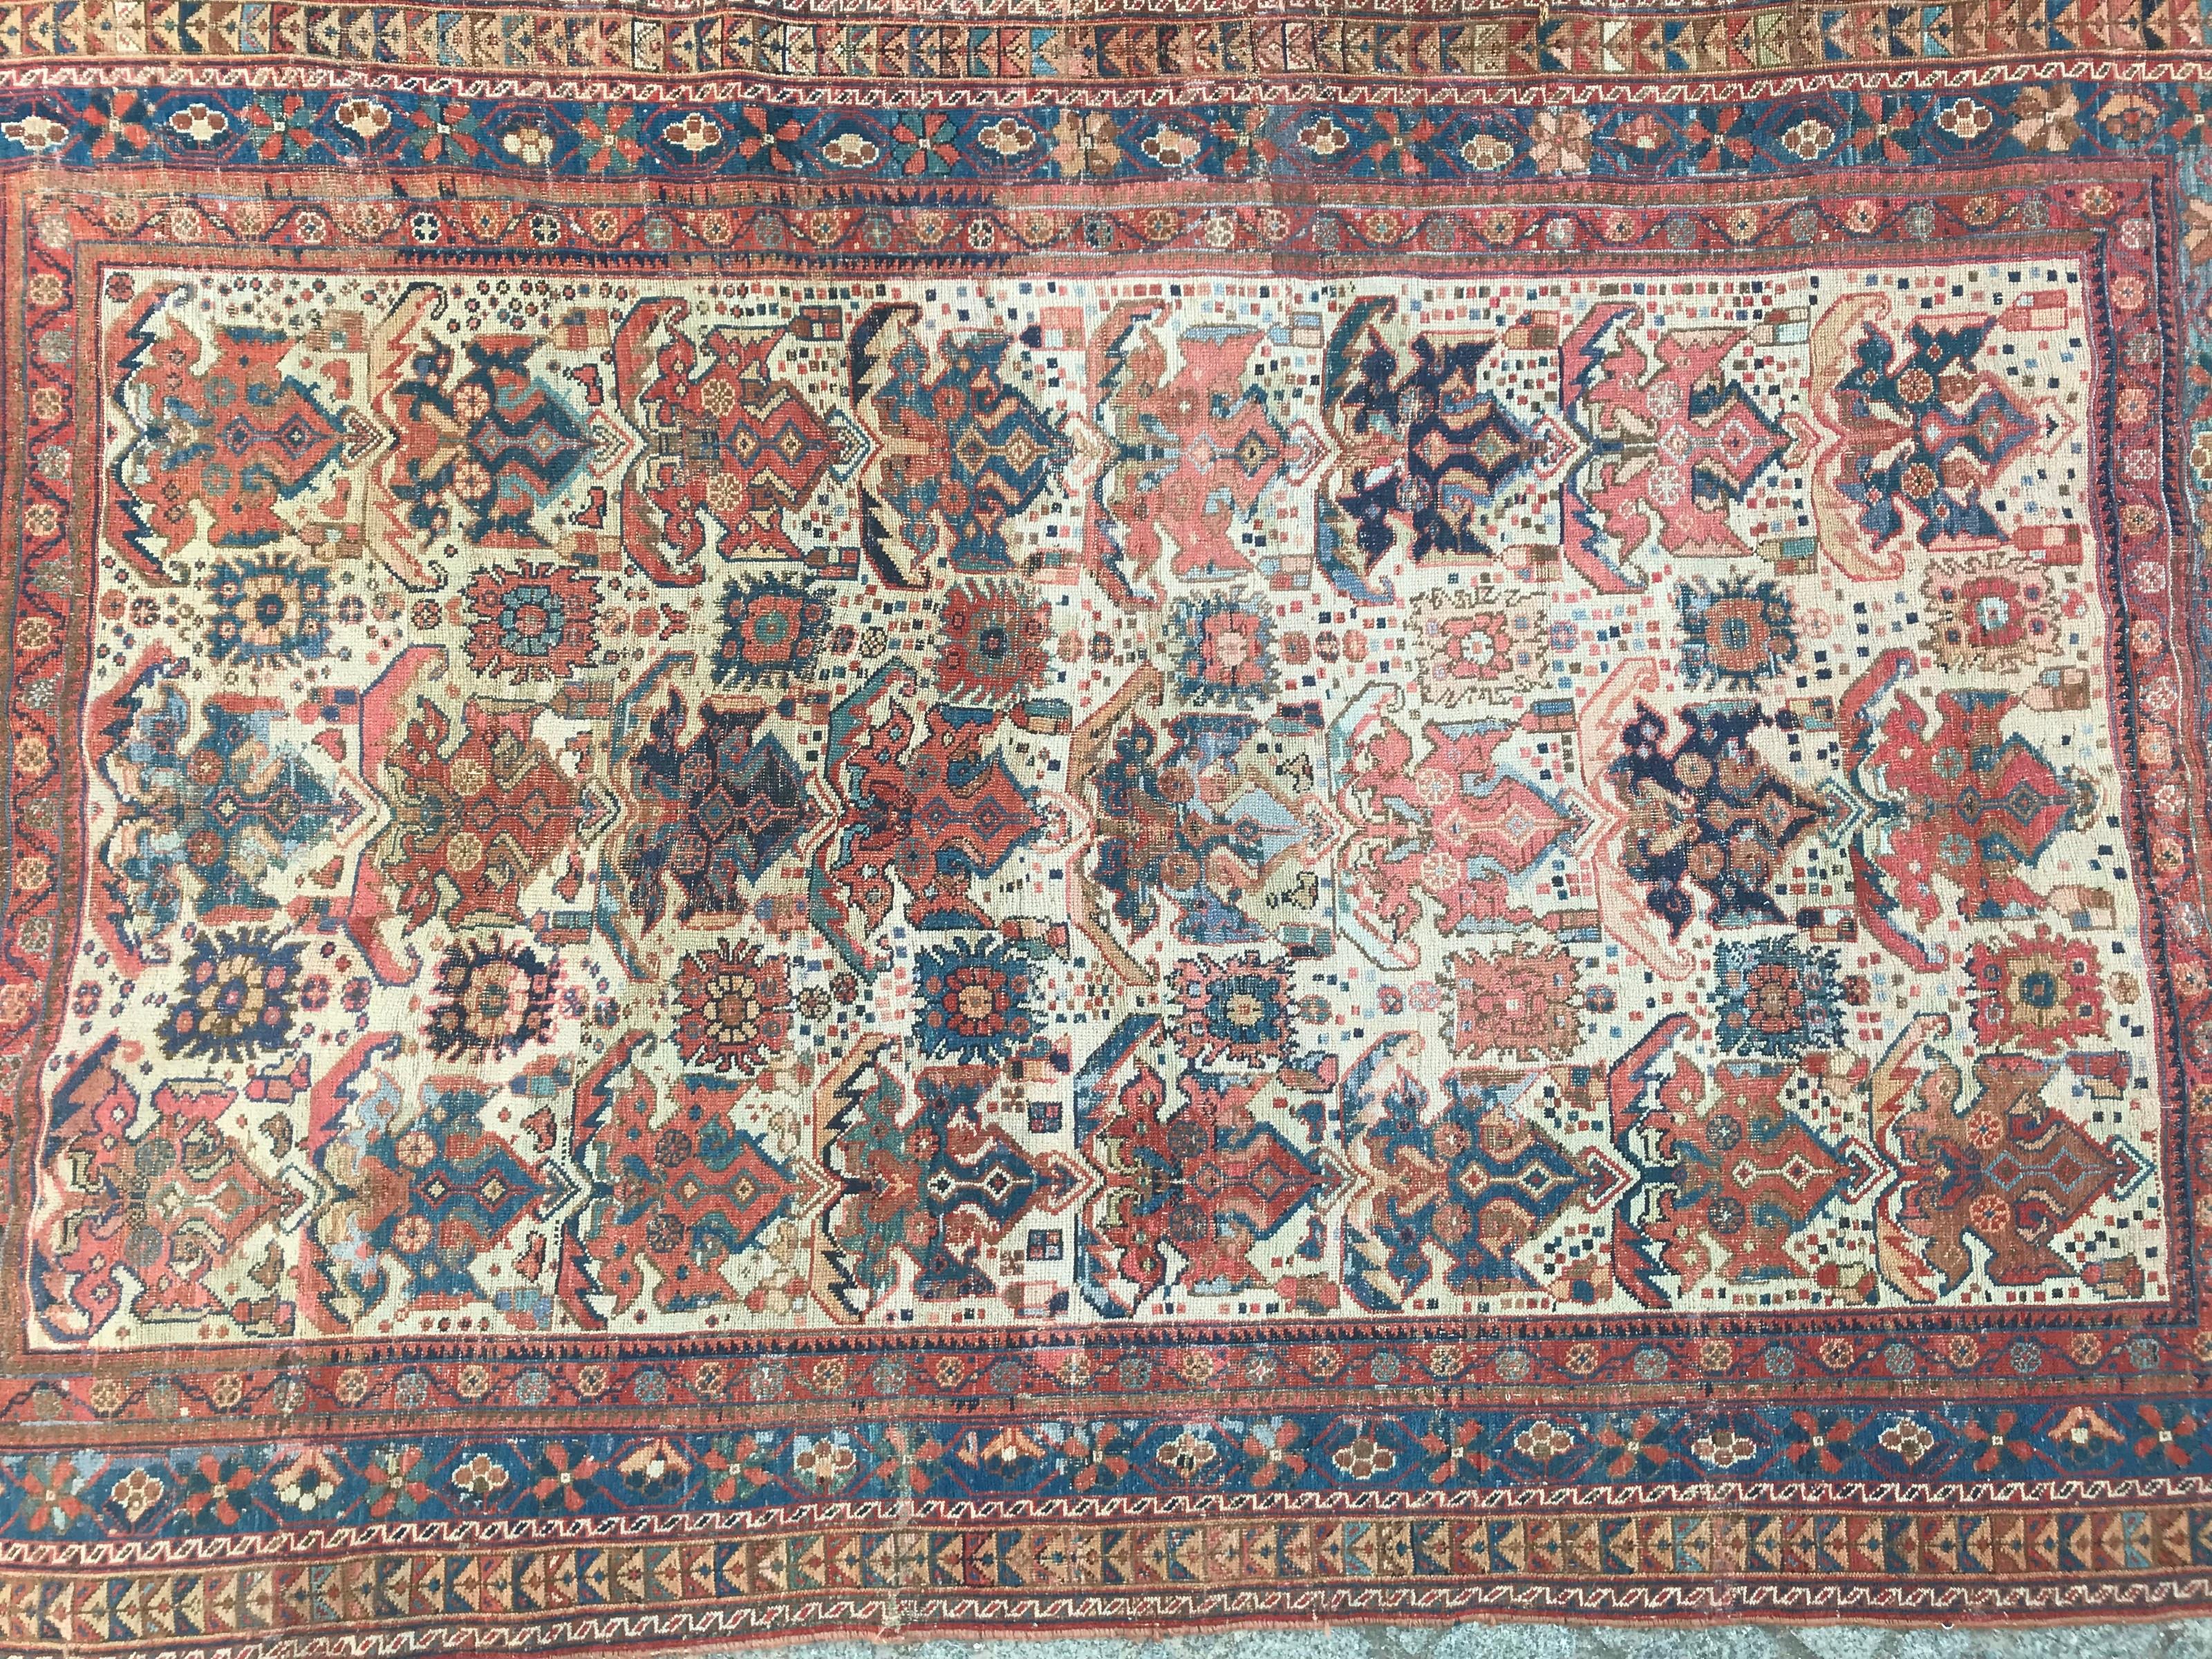 Very decorative 19th century rug with beautiful tribal design and natural colors with red, orange, blue and yellow, entirely hand knotted with wool velvet on wool foundation. Measures: 4ft 1in x 7ft 7in.